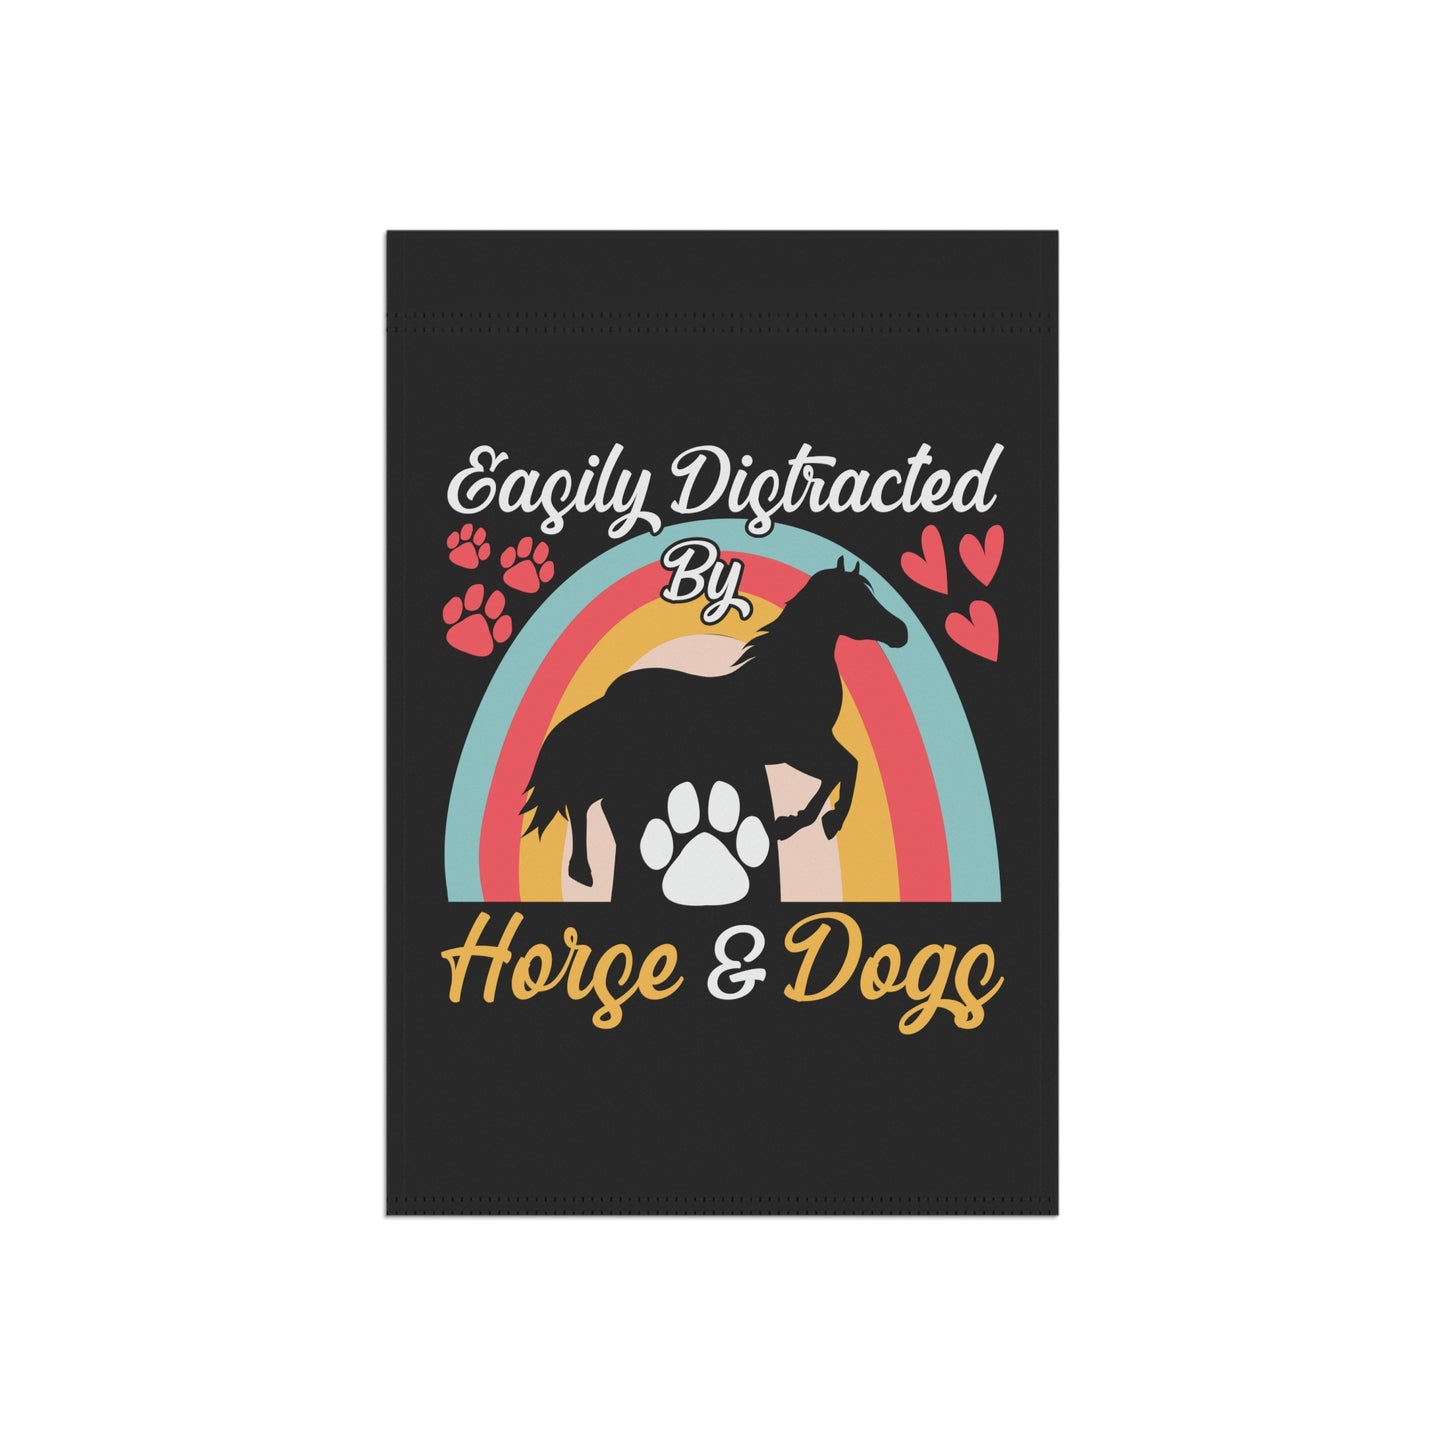 Easily Distracted by Horse and Dogs Garden & House Banner